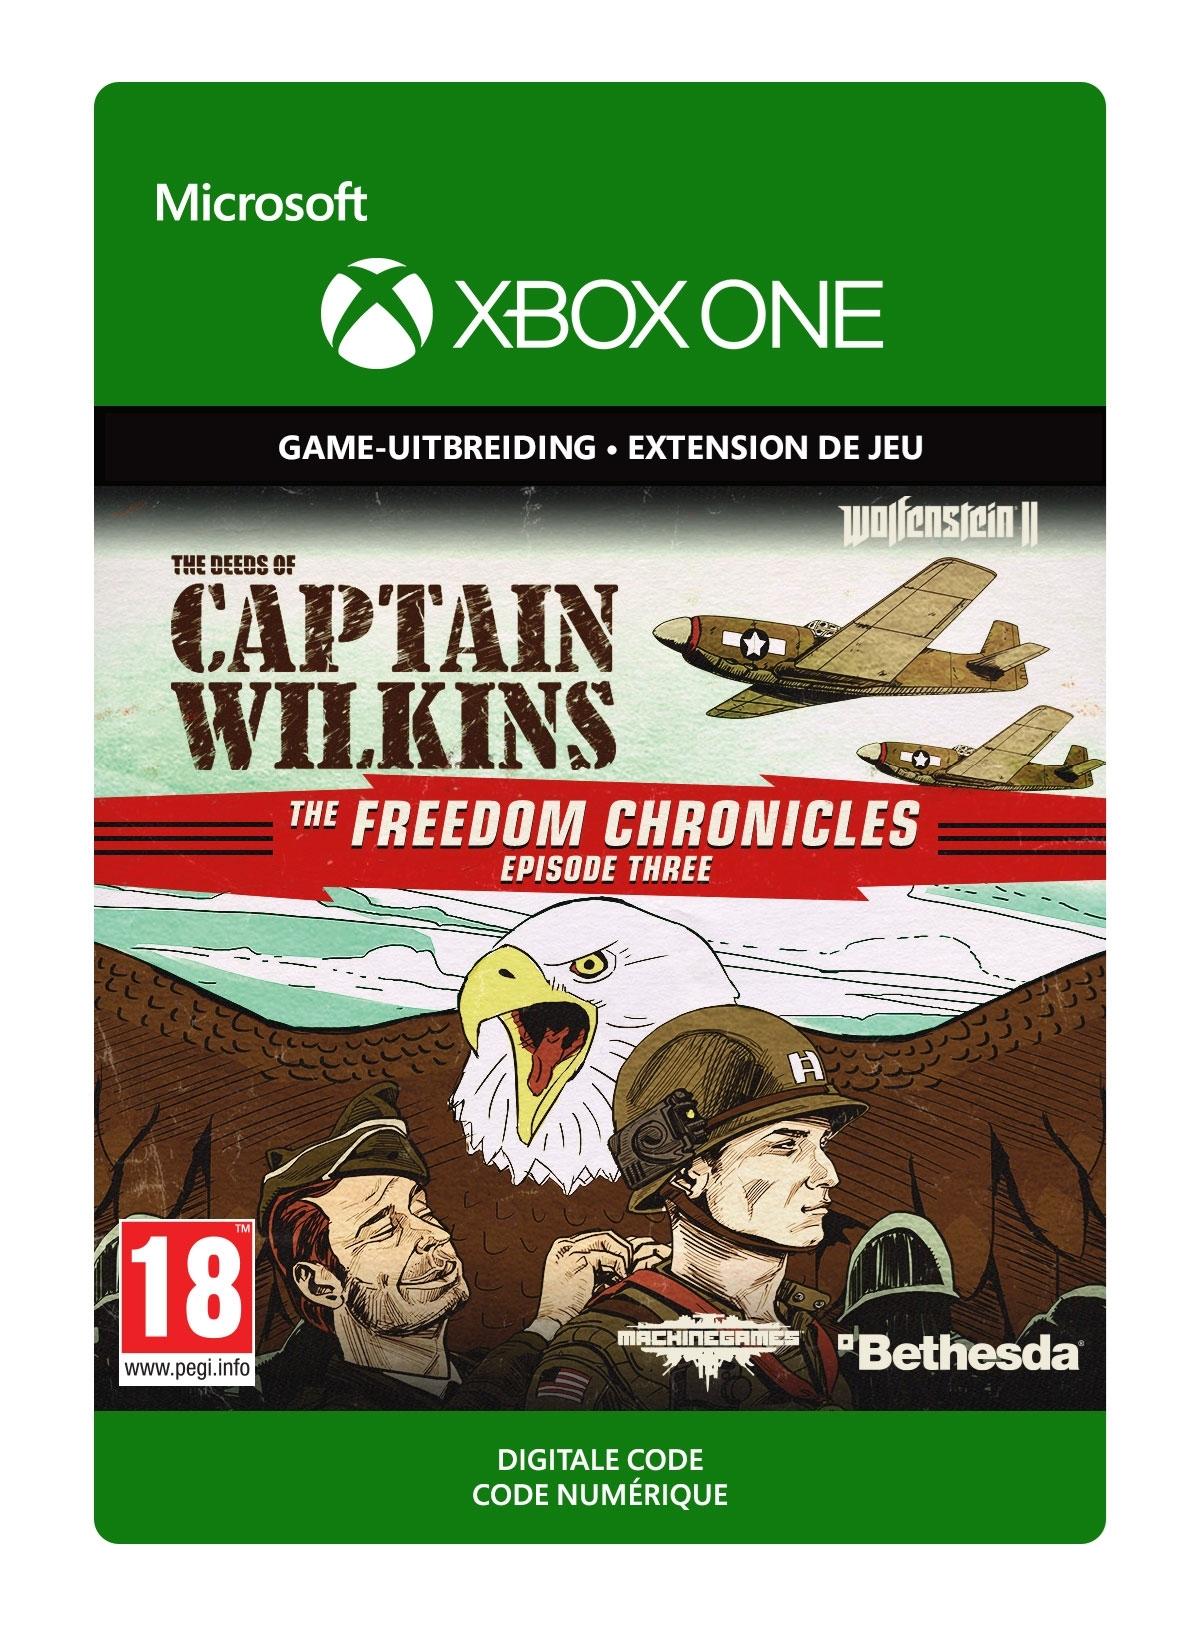 Wolfenstein II: The New Colossus: The Amazing Deeds of Captain Wilkins - Xbox One - Add-on | 7D4-00270 (e13ff80d-2fbd-429d-889e-811acbed37f3)